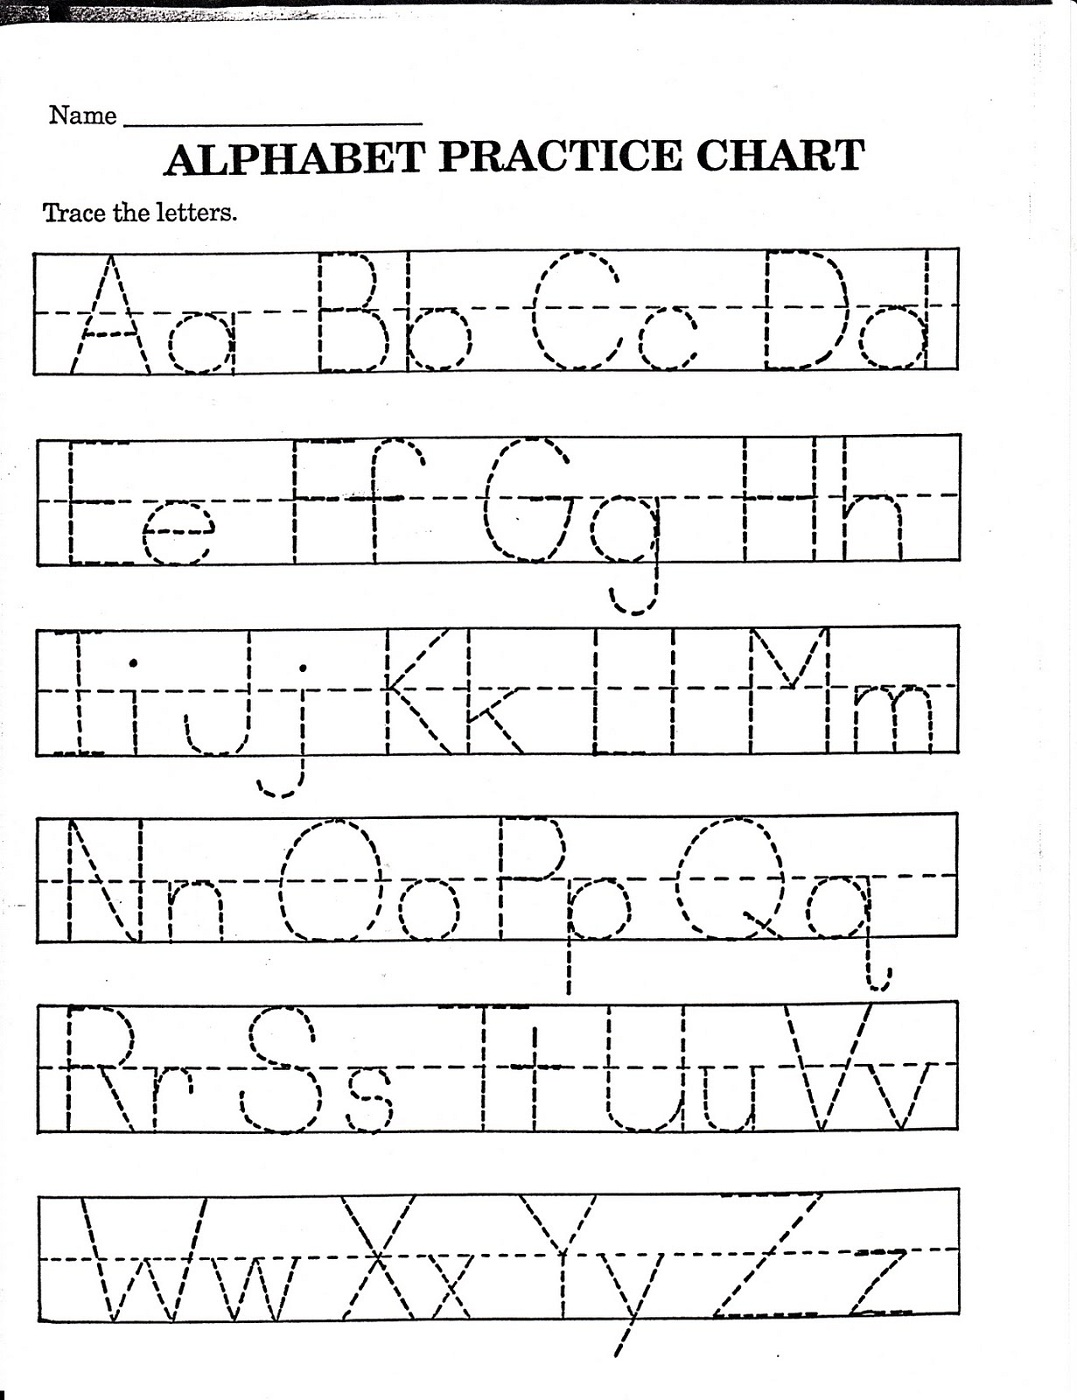 practice sheets for writing letters kindergarten